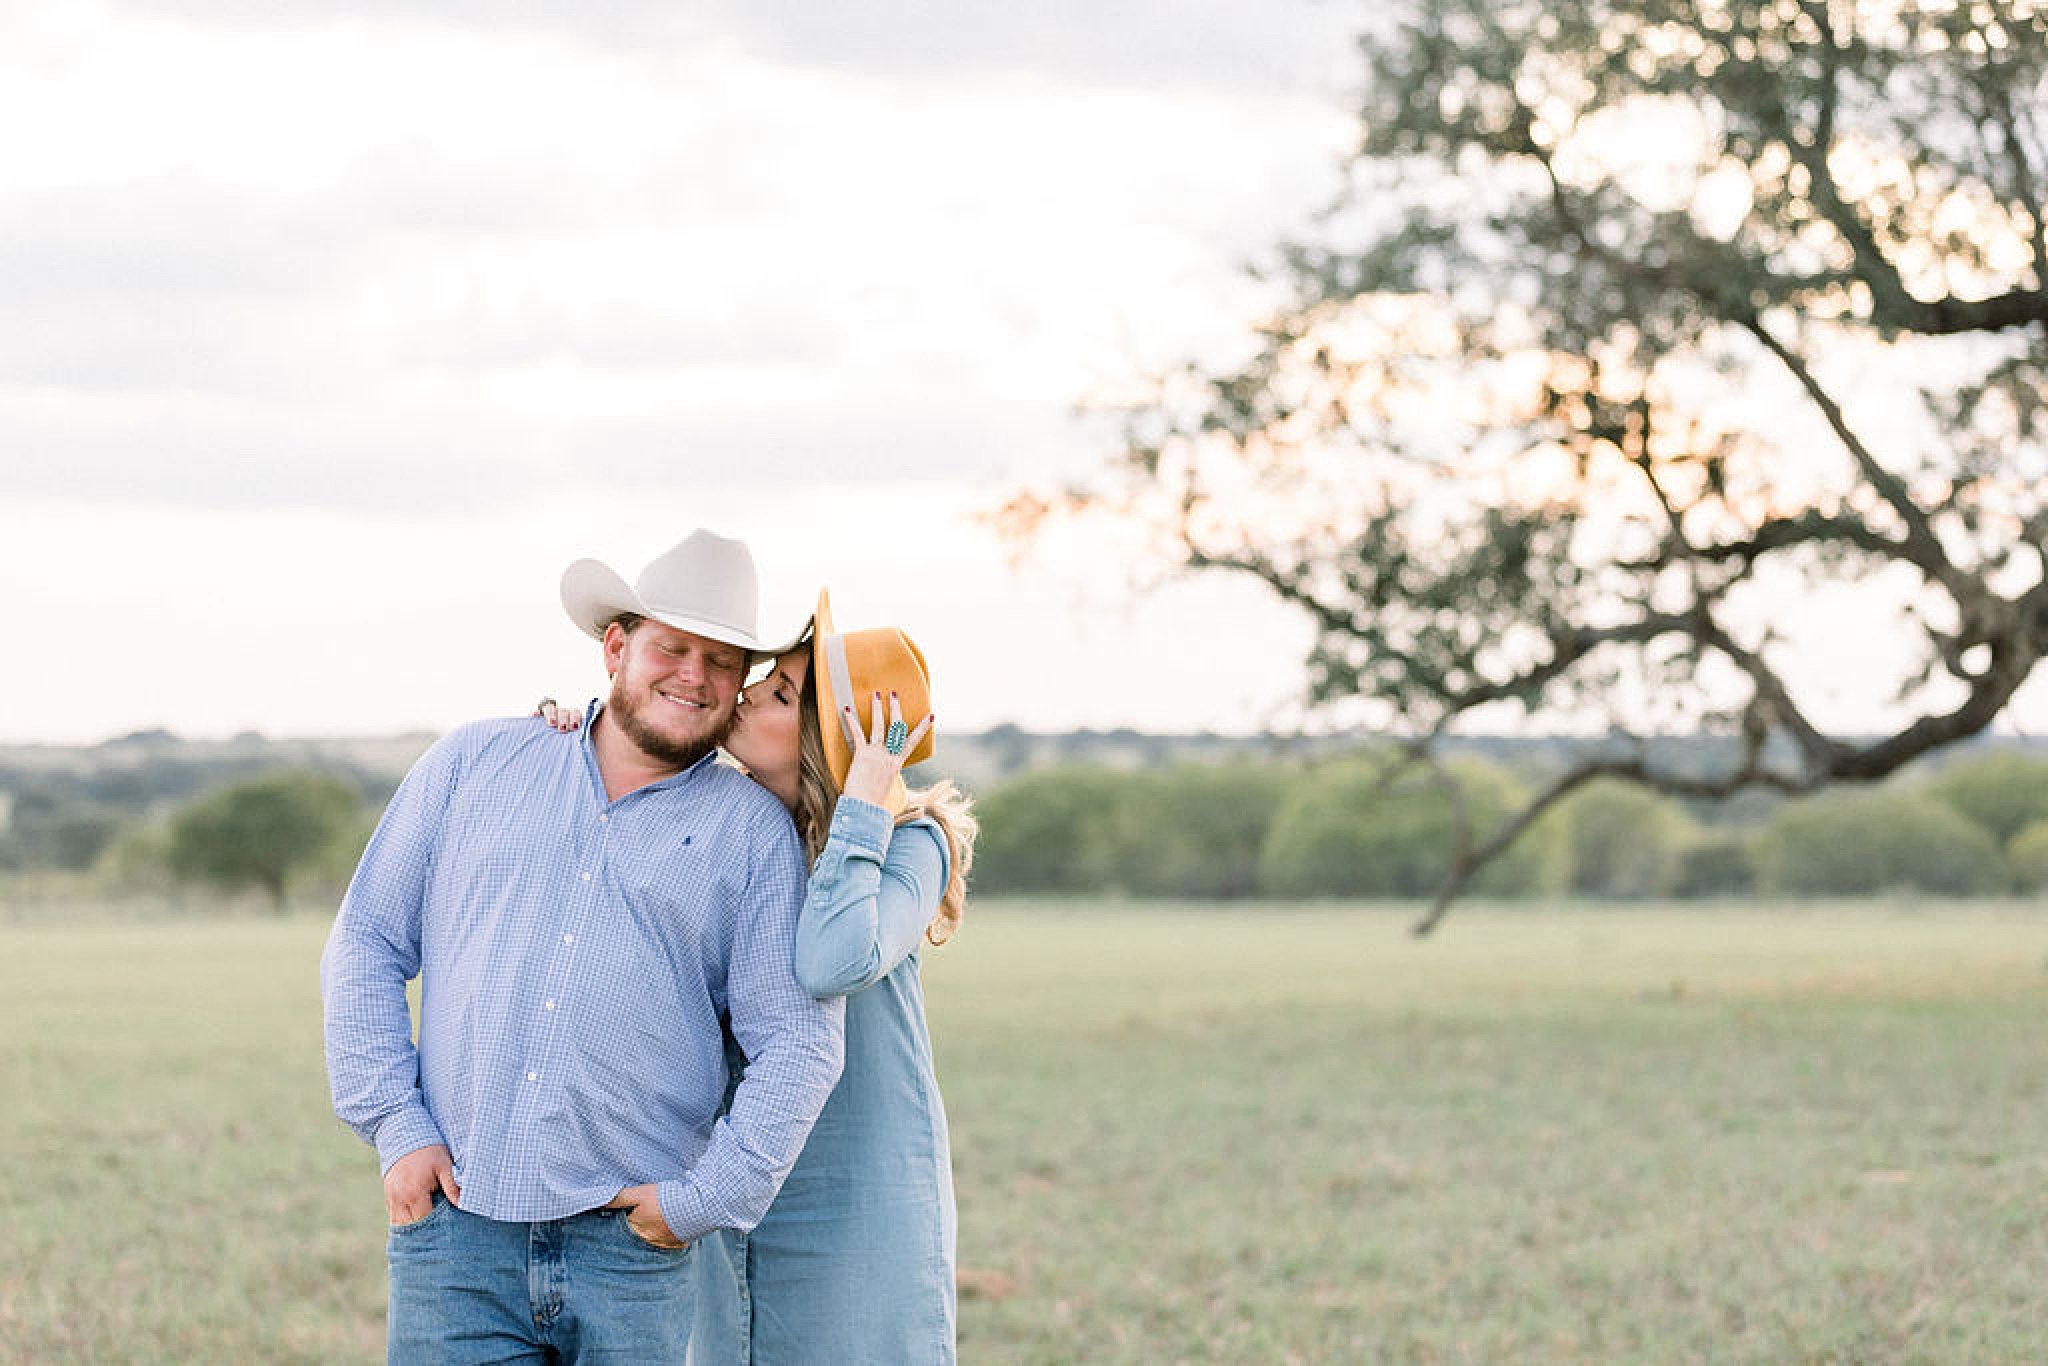 Engagement Session at the Farm, Texas Wedding Photographer, Anna Kay Photography